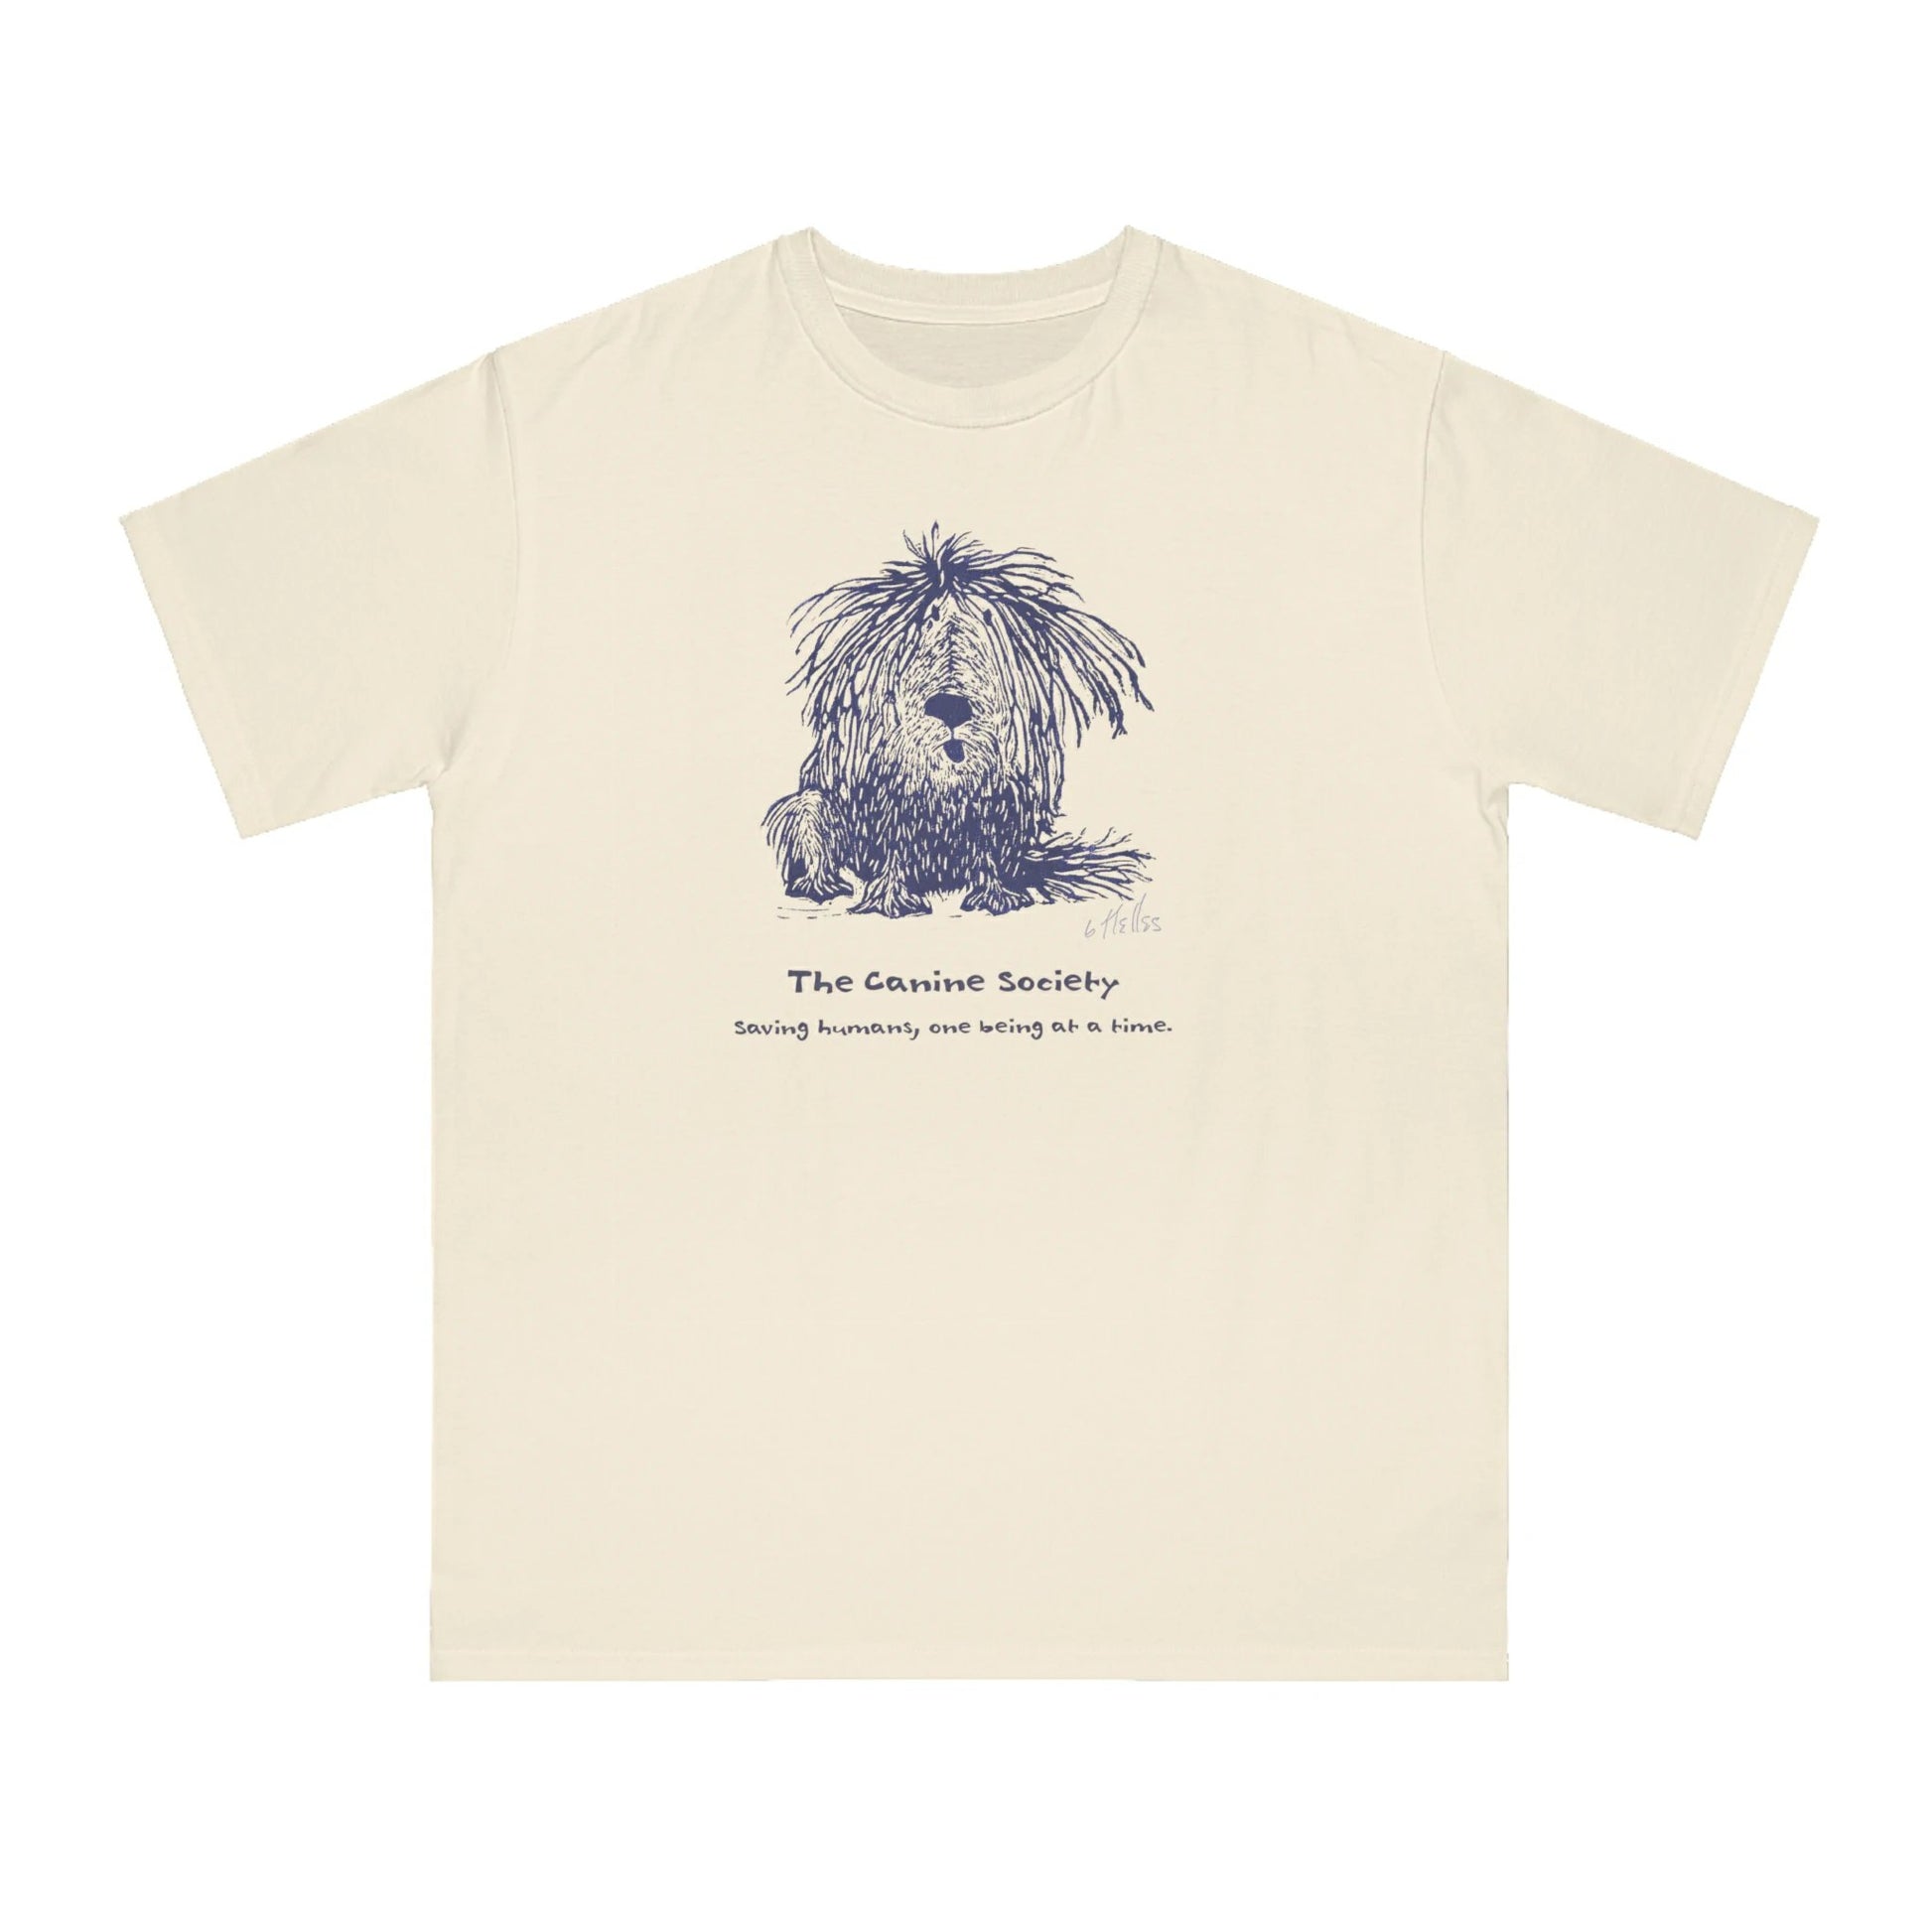 A Shaggy Dog sits on an off-white unisex men's t-shirt. Text below reads: 'Canine Society Saving Humans One Being at a Time.'